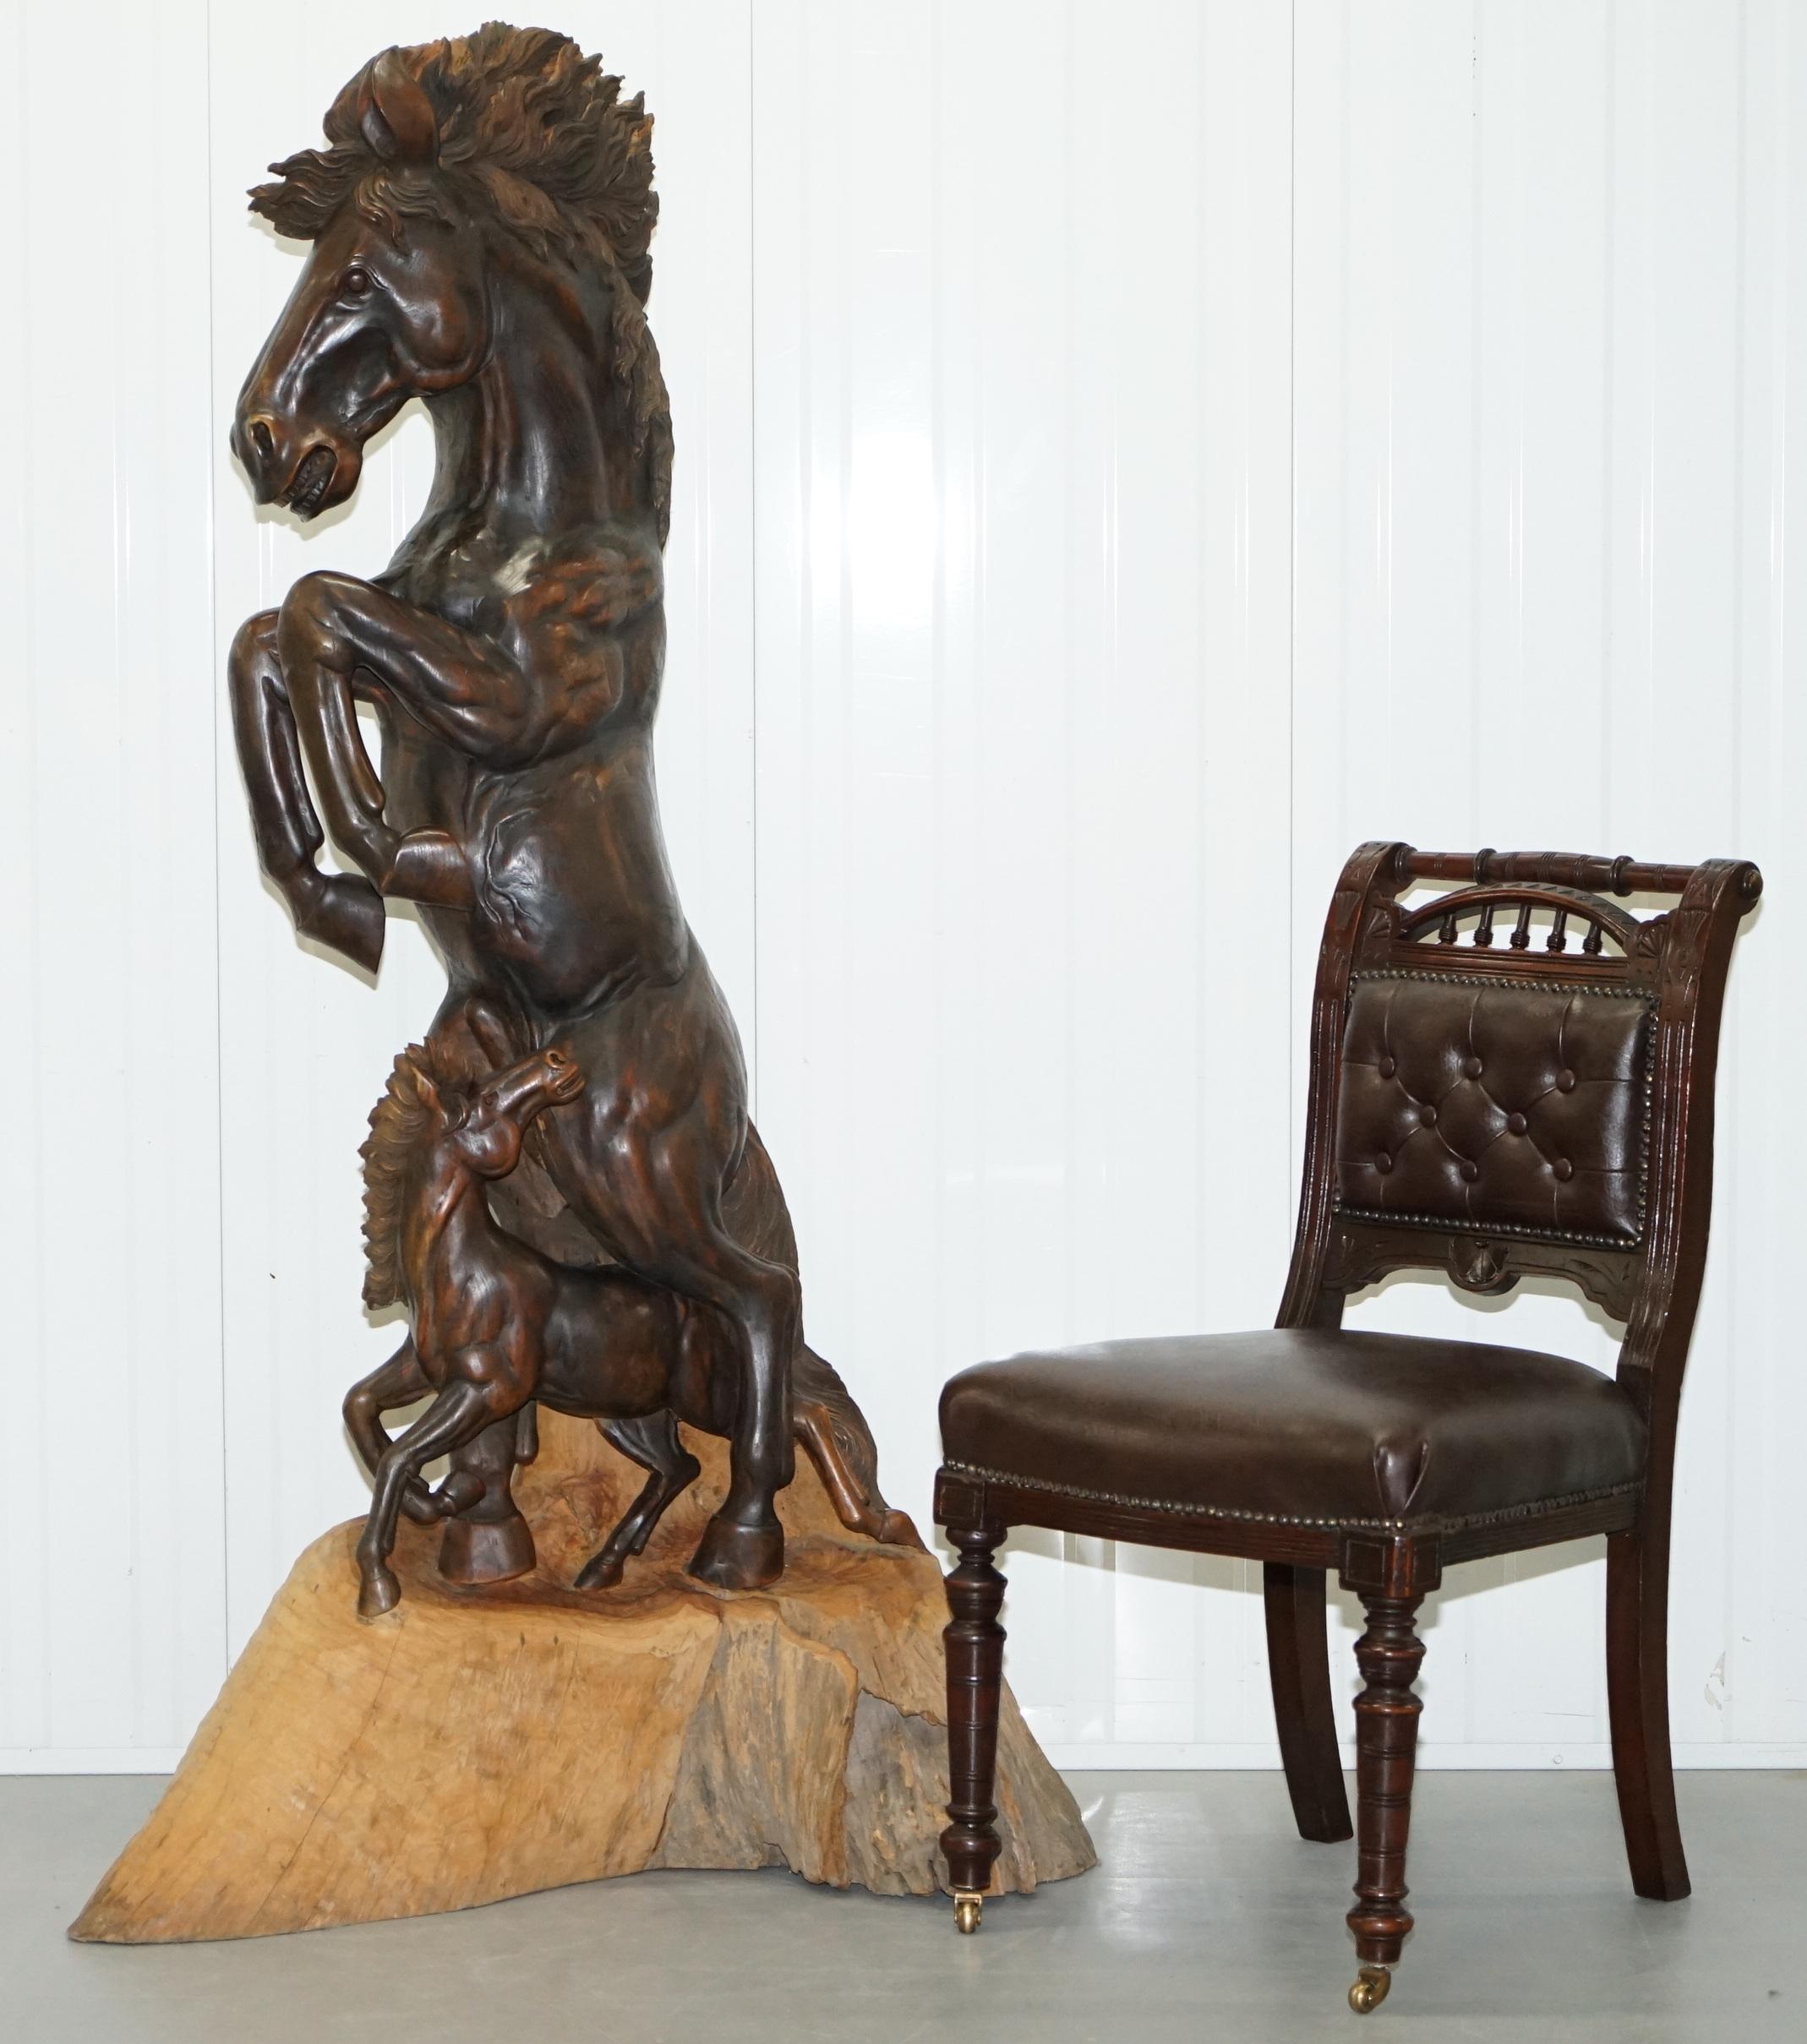 We are delighted to offer for sale this one of a kind hand carved from a felled tree sculpture of a rearing horse and a foal calf

A truly mouth-wateringly beautiful piece, the horse ha such as a sense of movement and flow about it with the main